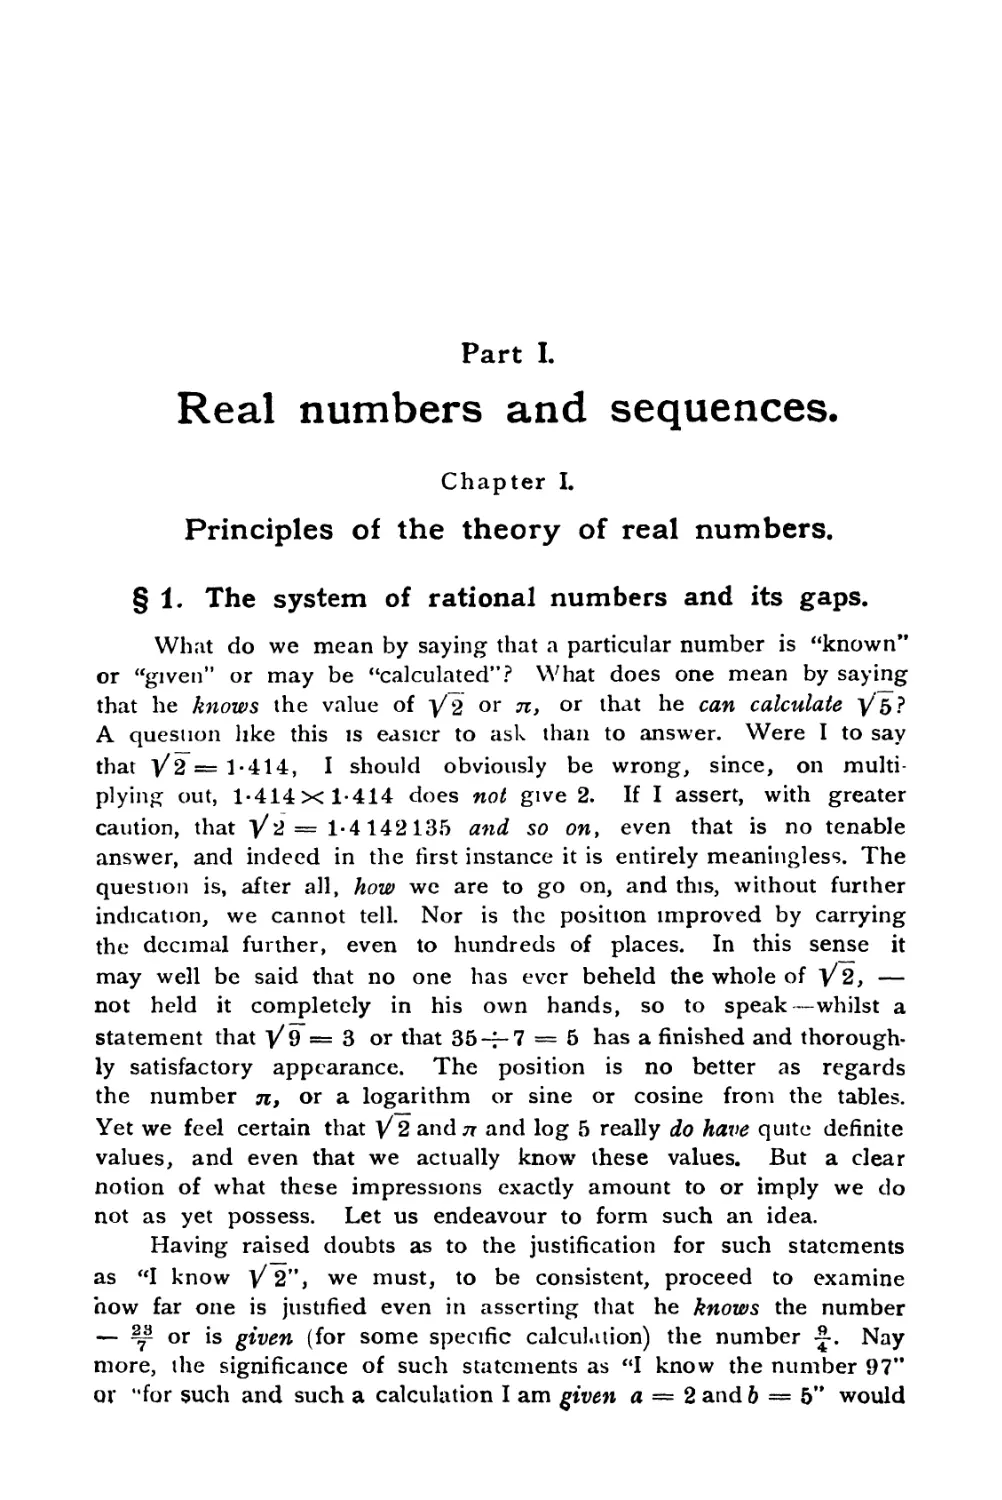 ---------- Part I. Real numbers and sequences
Chapter I. Principles of the theory of real numbers